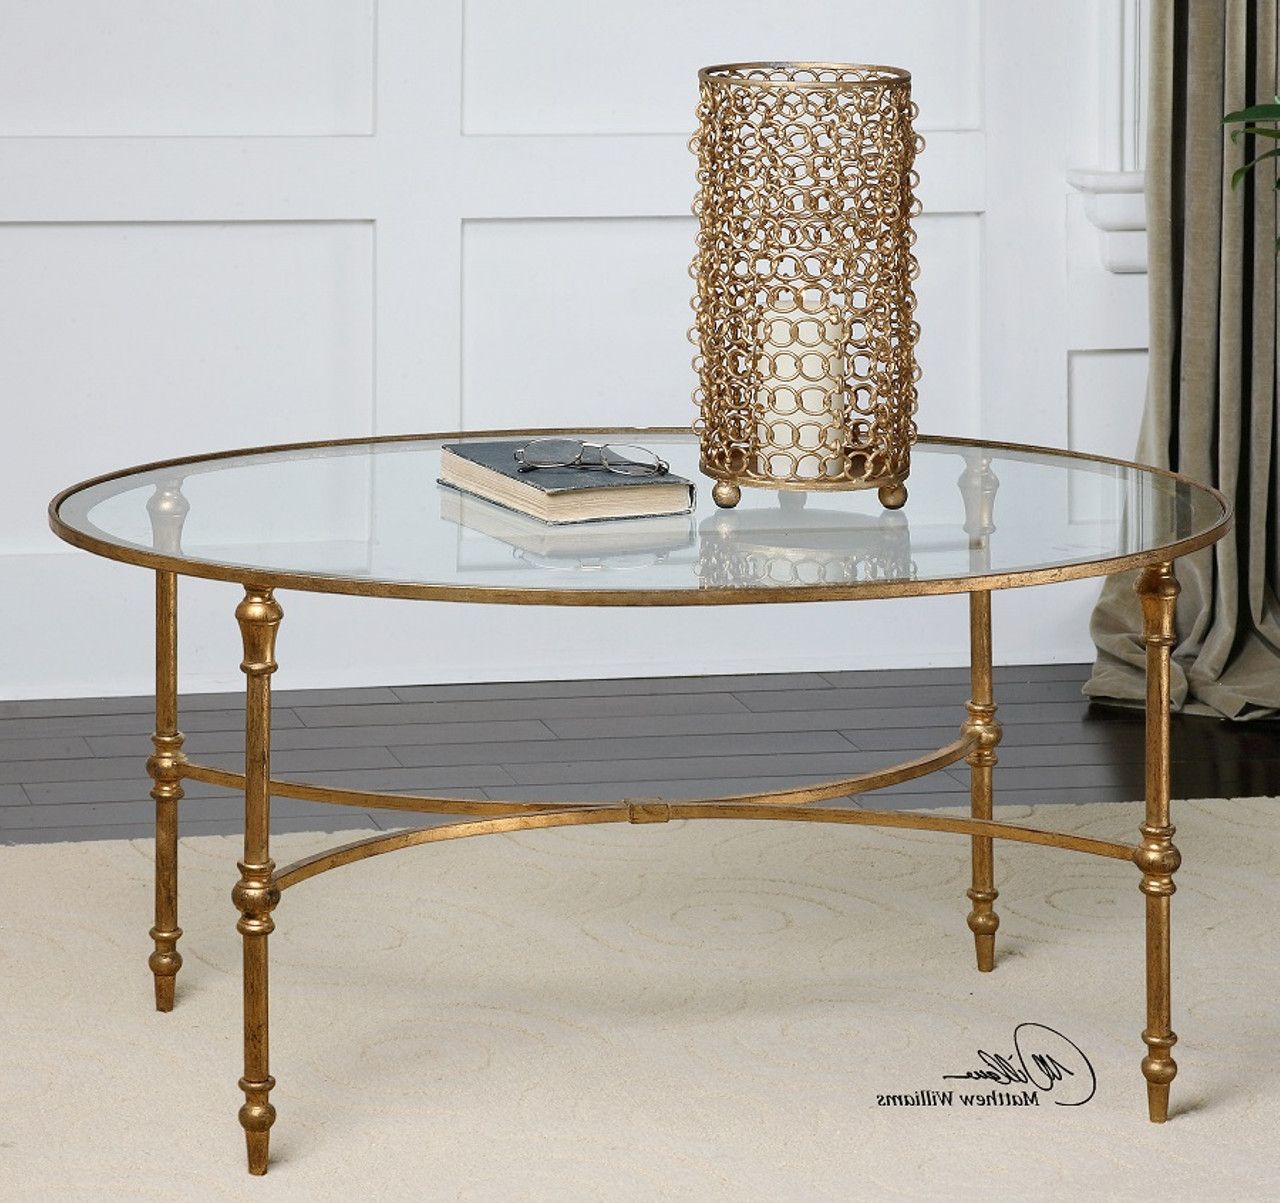 Oval Glass Coffee Tables Throughout Latest Vitya Gold Leaf Oval Glass Coffee Table (View 8 of 15)